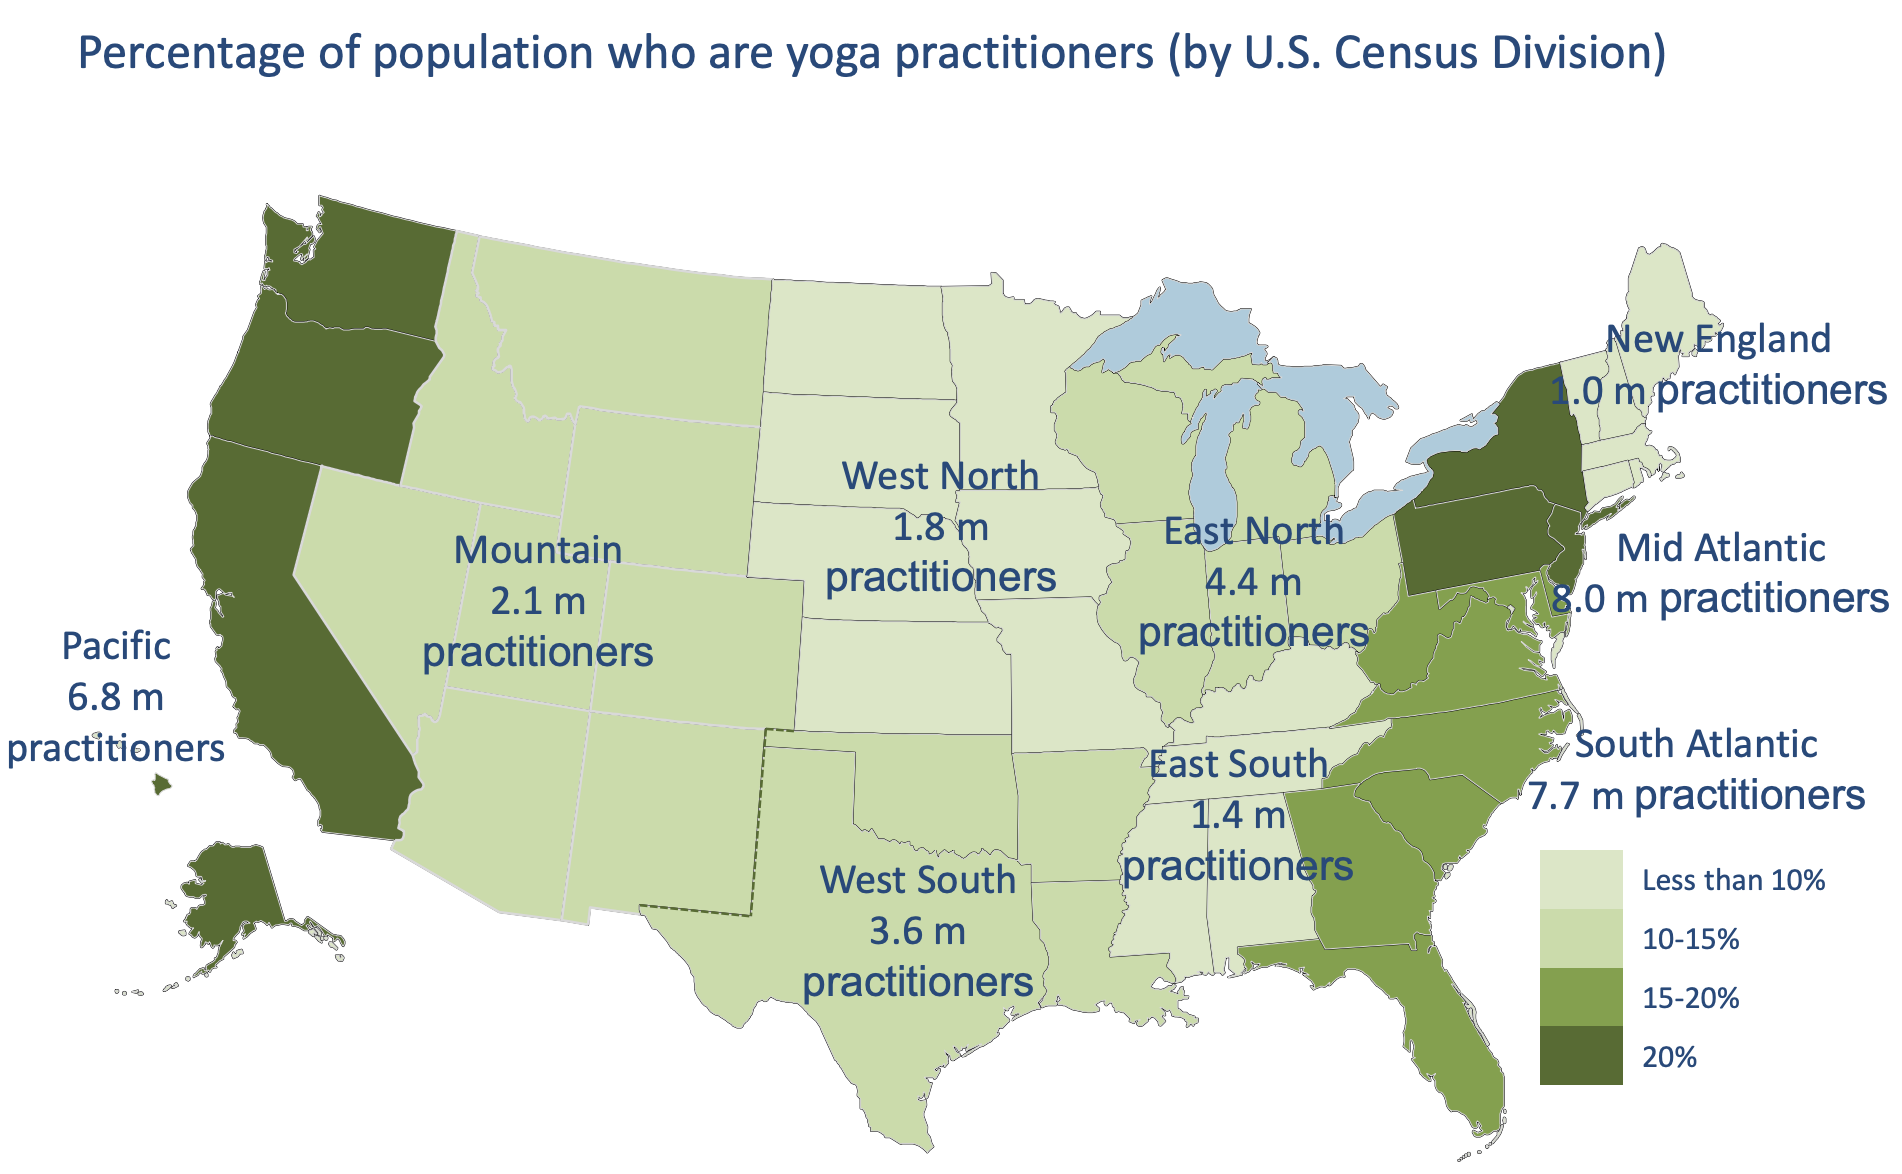 spread of yoga across different states and regions